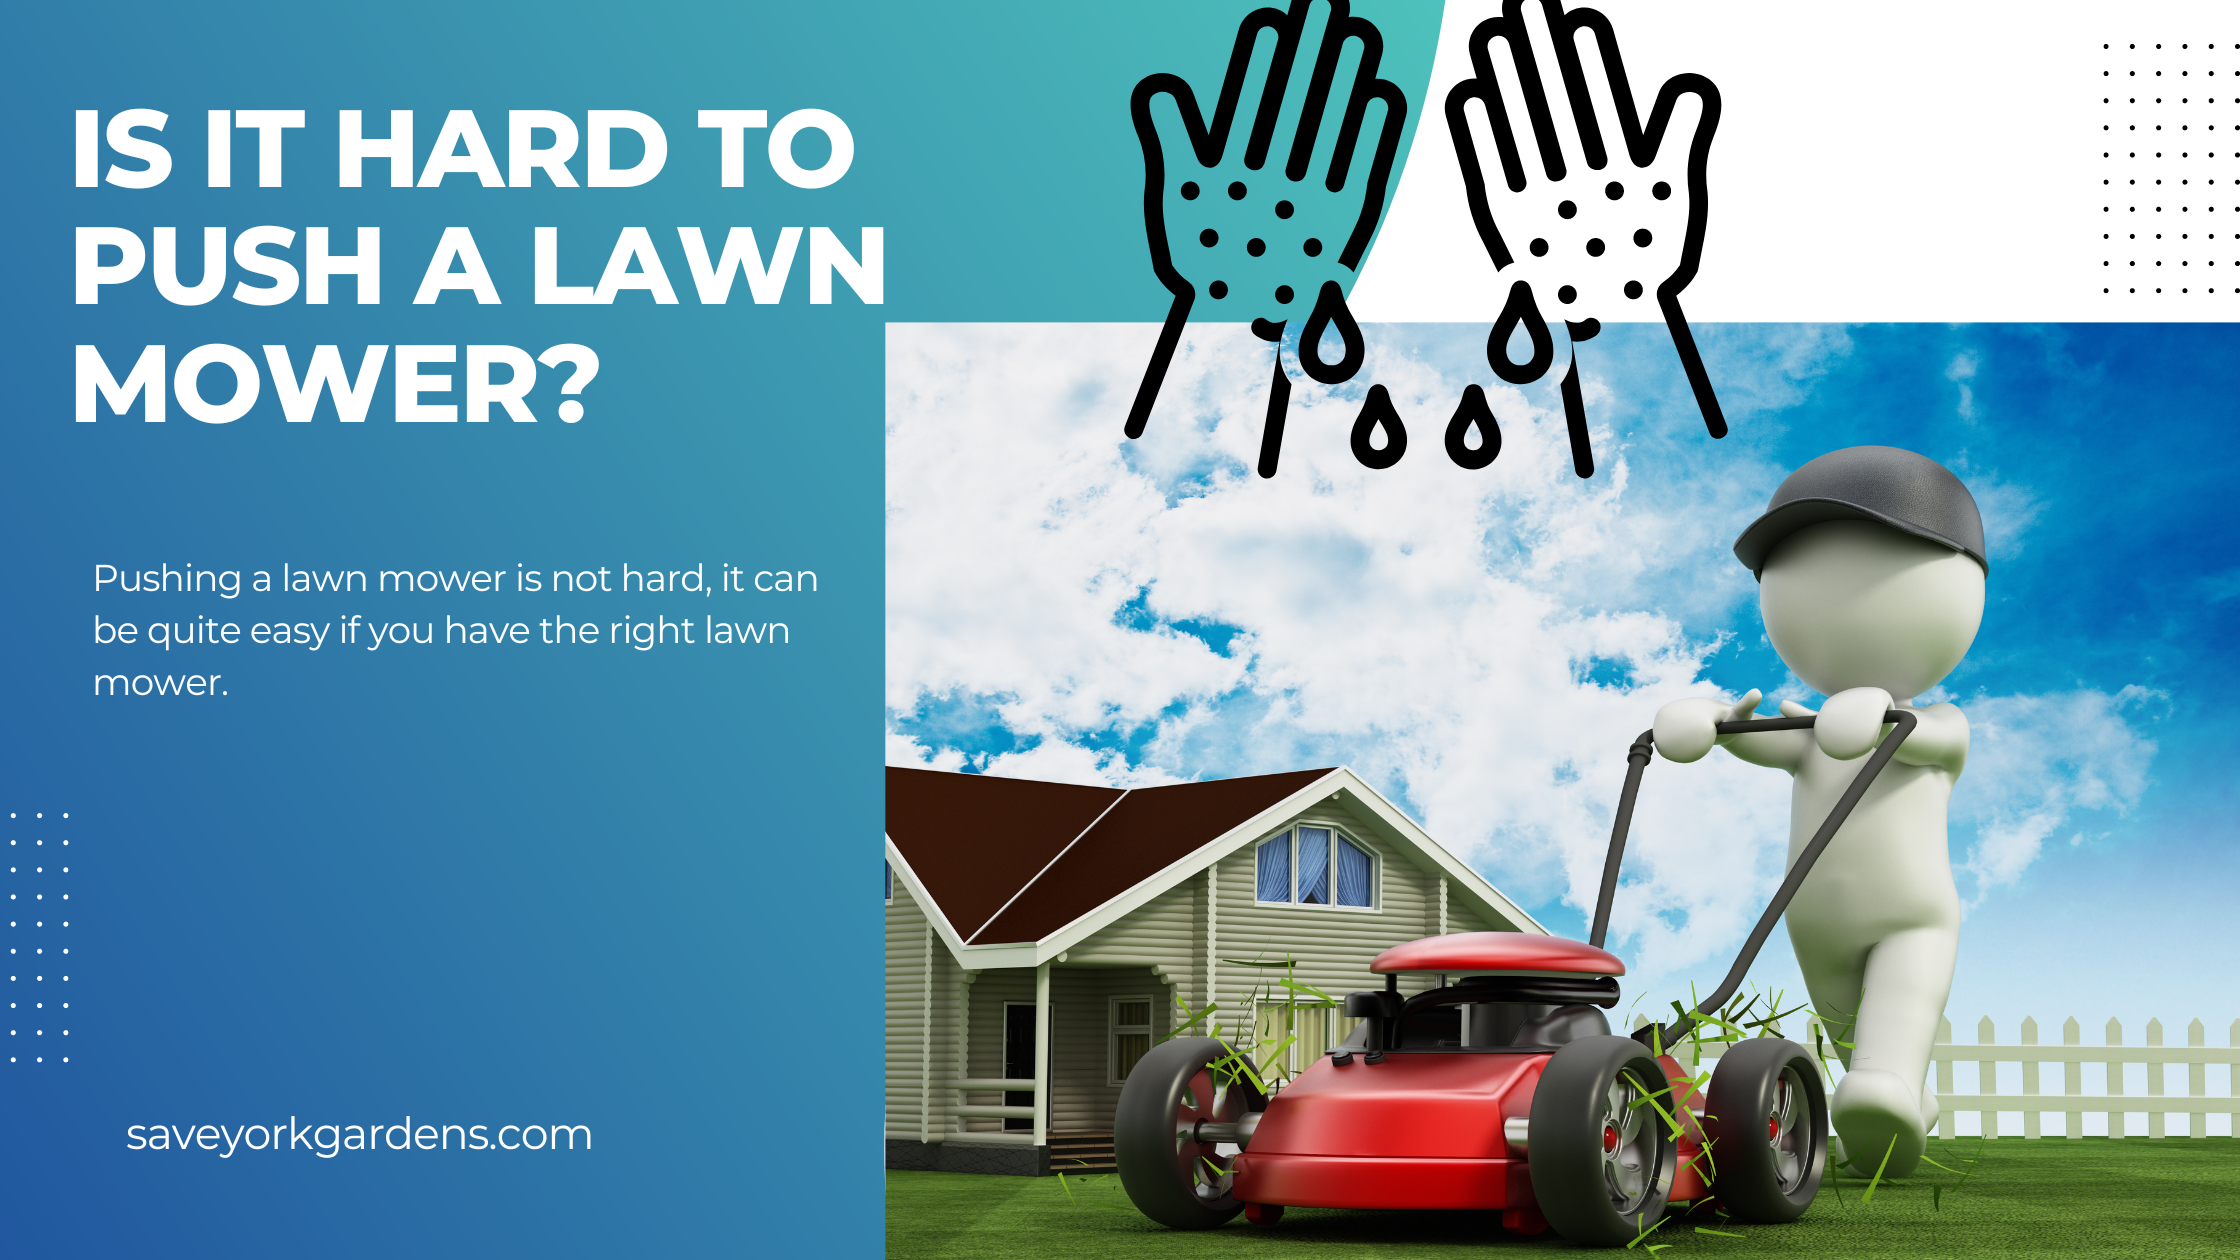 Is It Hard To Push A Lawn Mower?